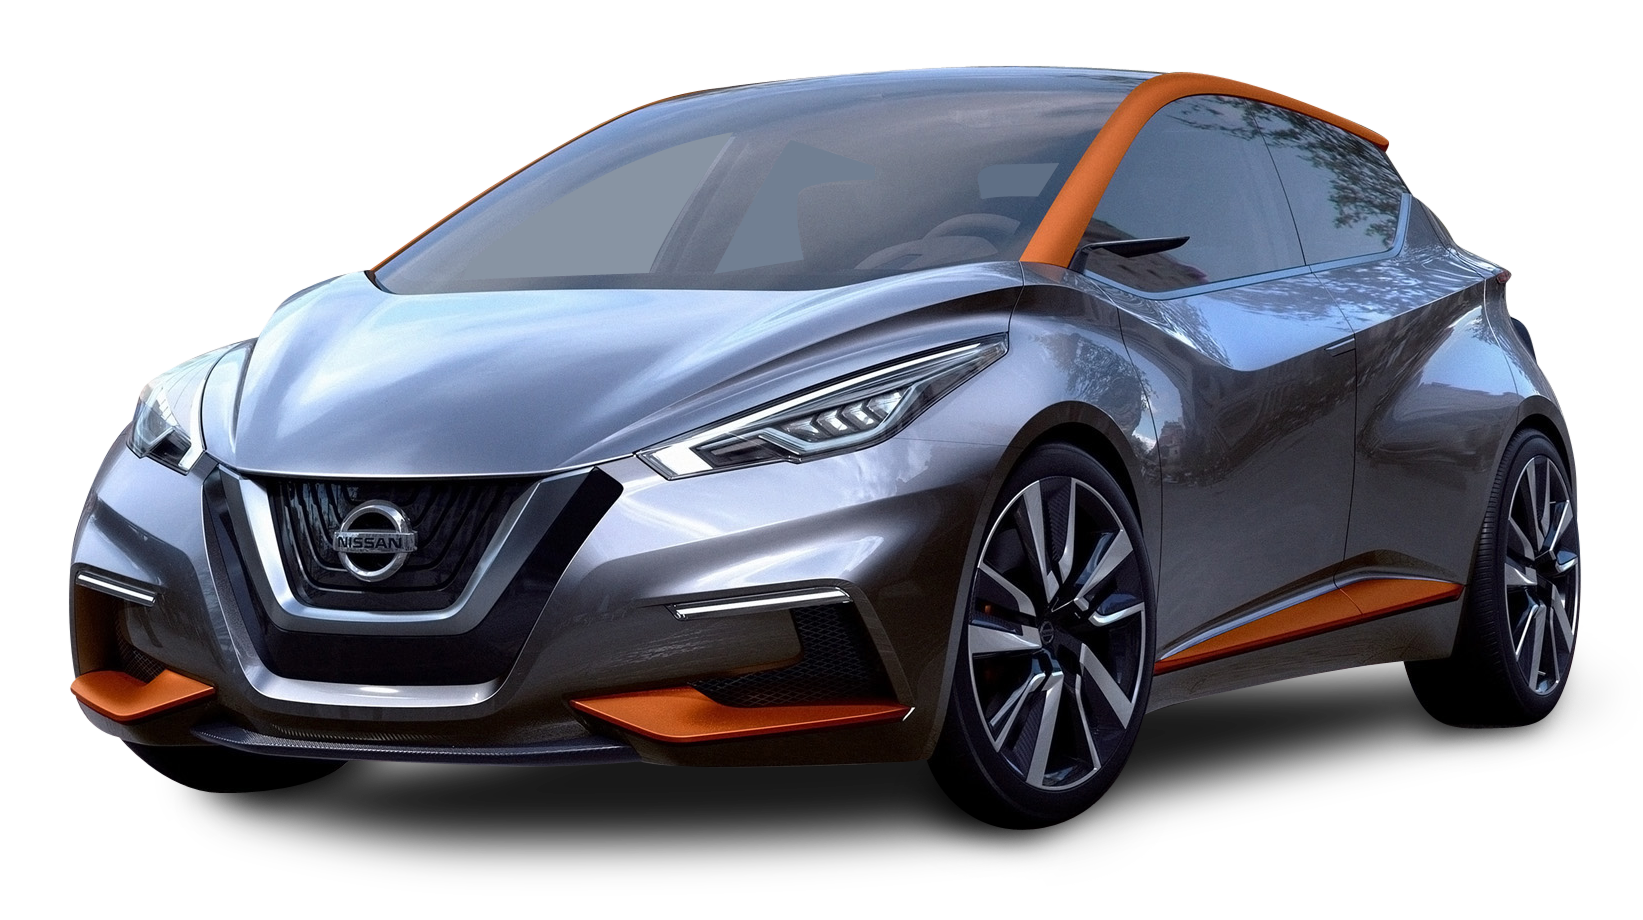 Nissan Sway Wallpapers